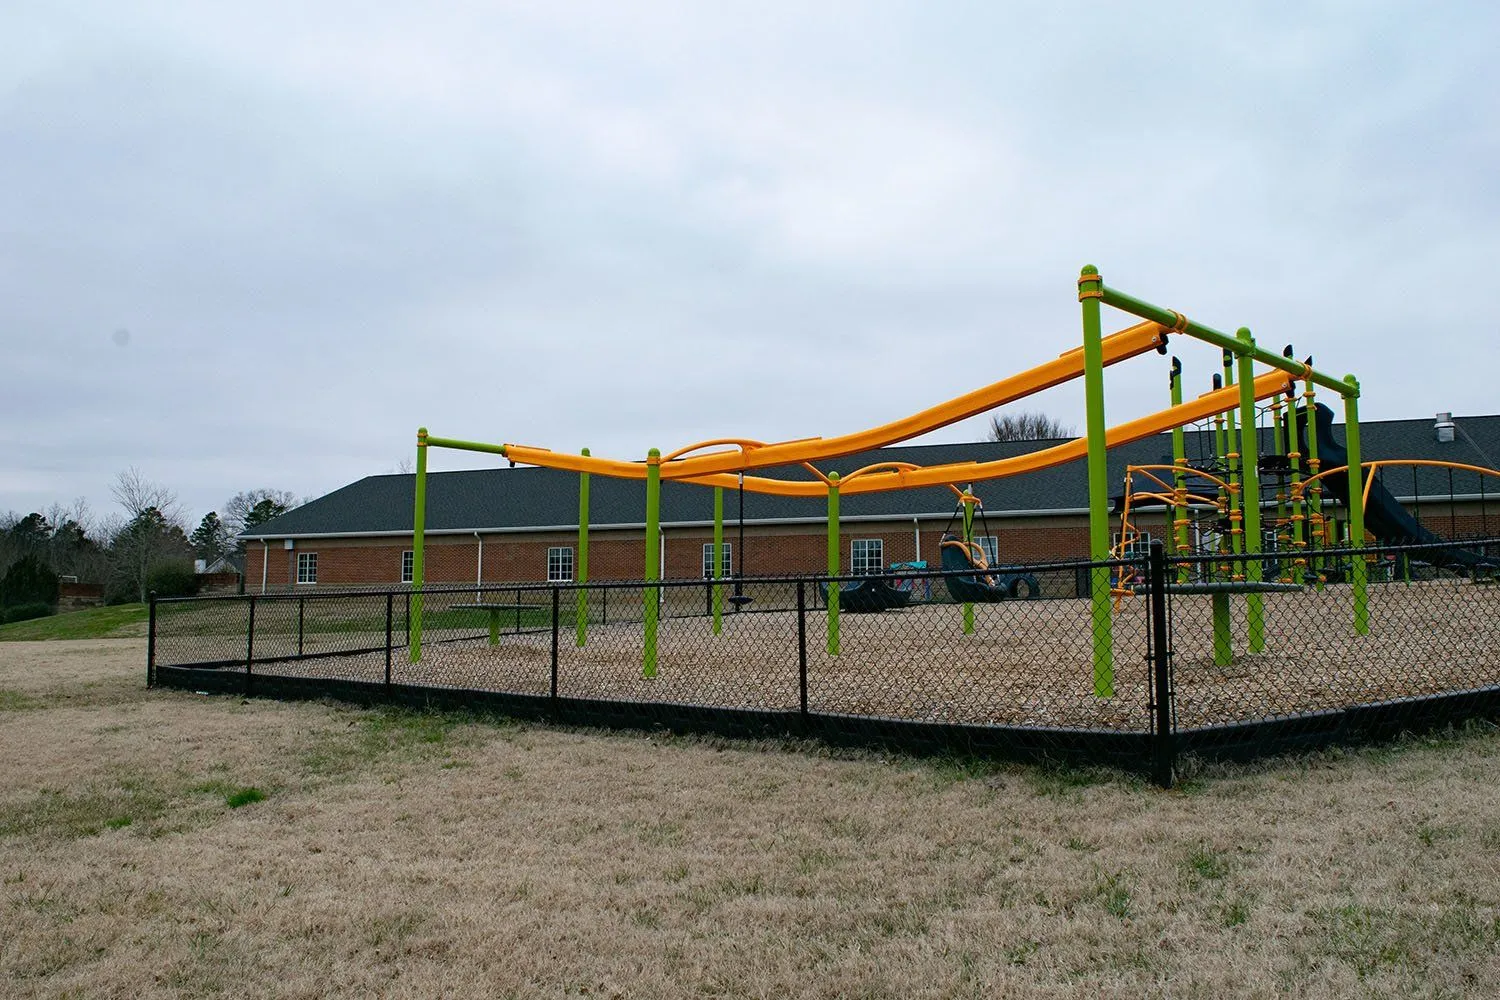 Commercial chain link fence installed at school playground by commercial fence company, lc fence in knoxville